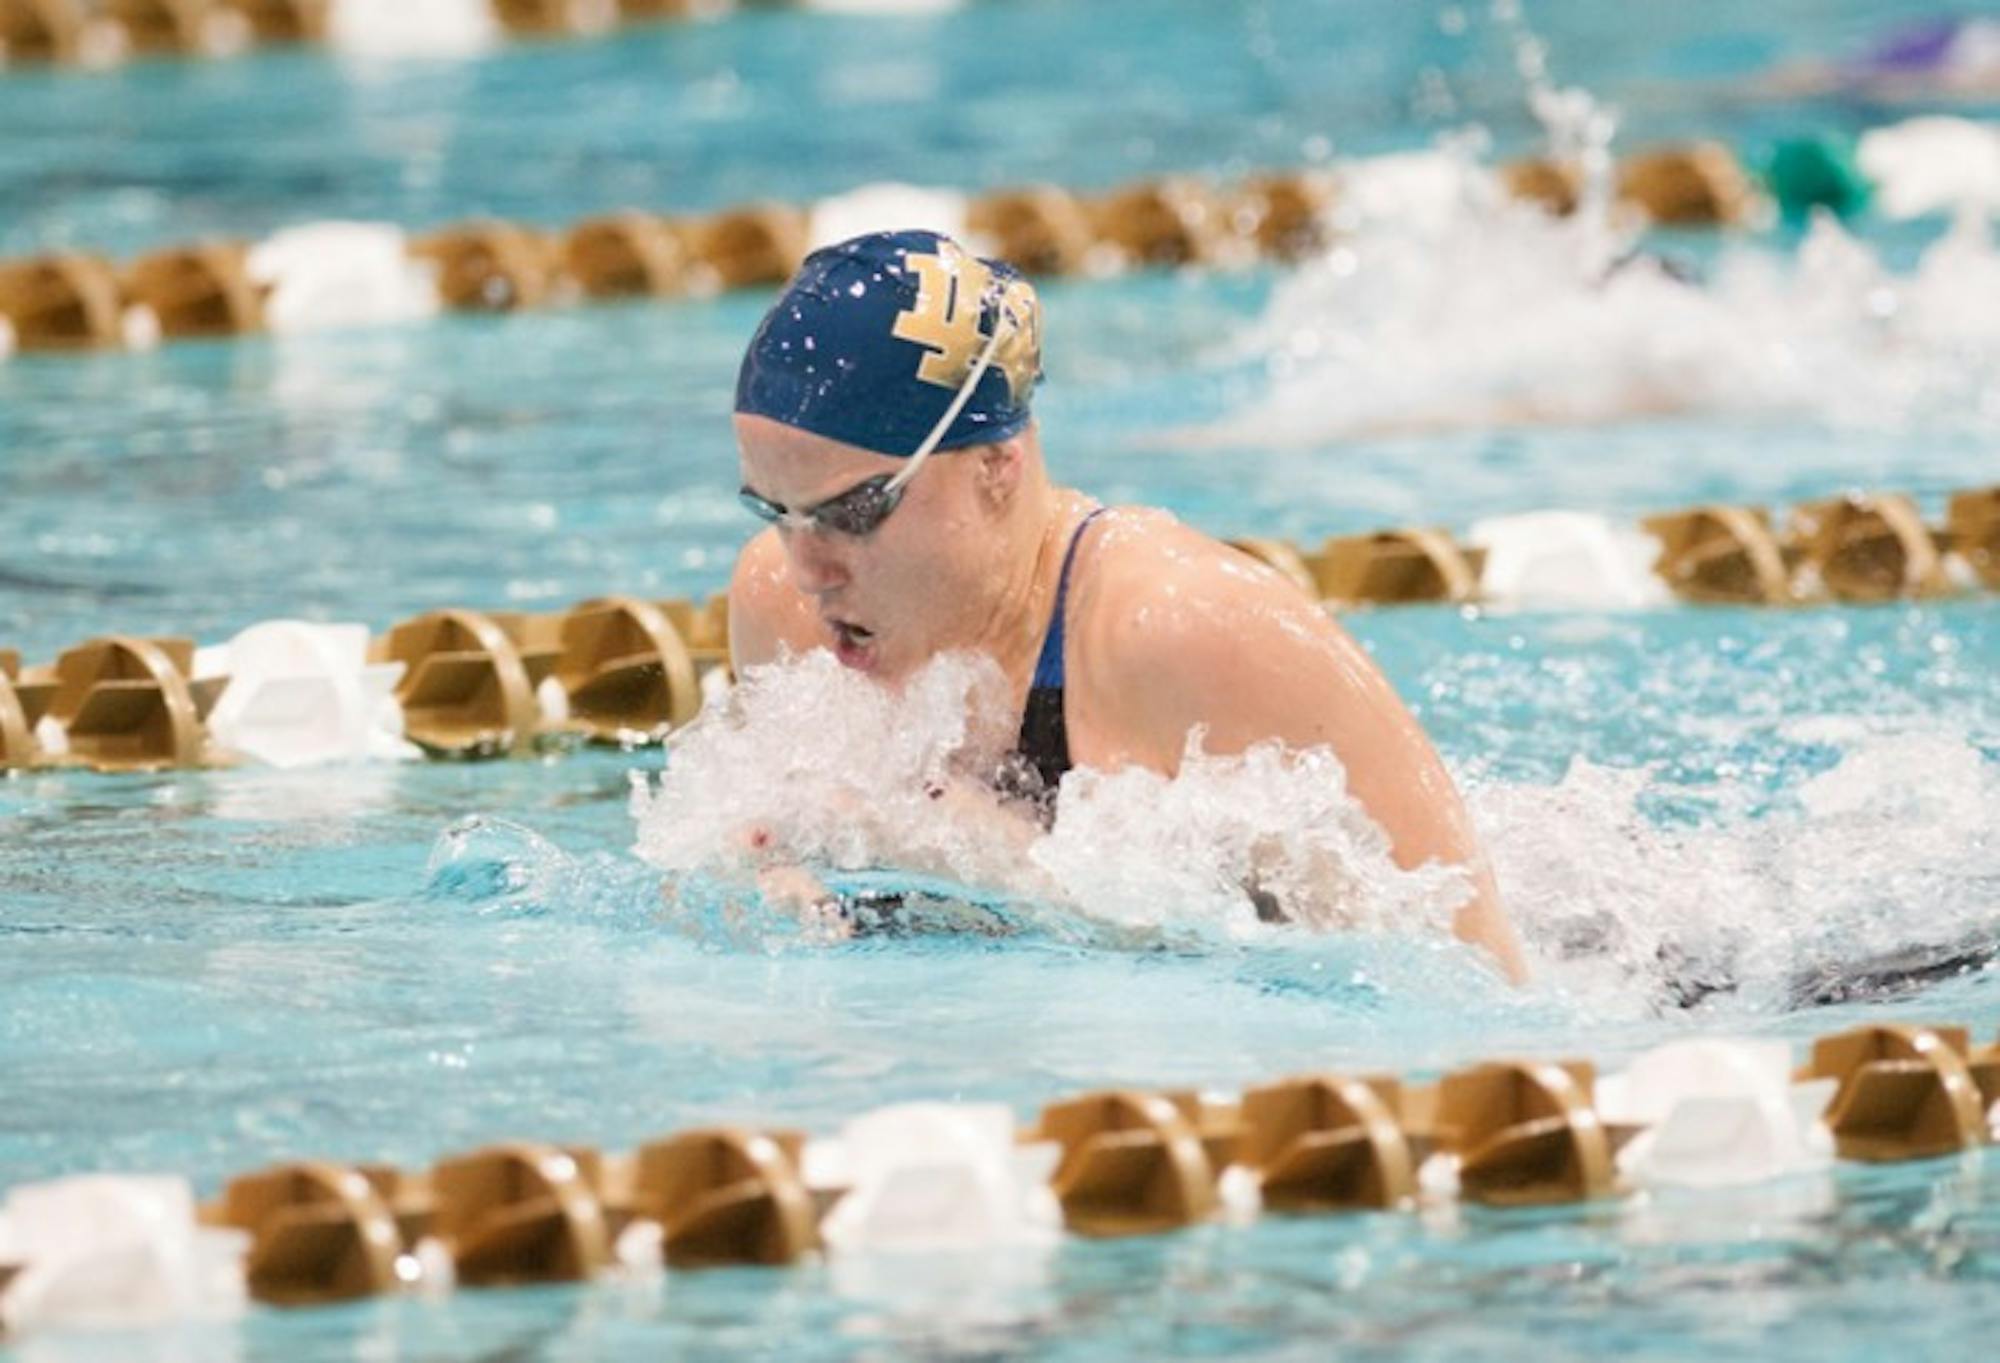 Junior Emma Reaney competes in the breaststroke at the Shamrock Invitational on Jan. 31. Reaney holds the No. 1 seed in the 200-yard breaststroke heading into the NCAA championship meet.